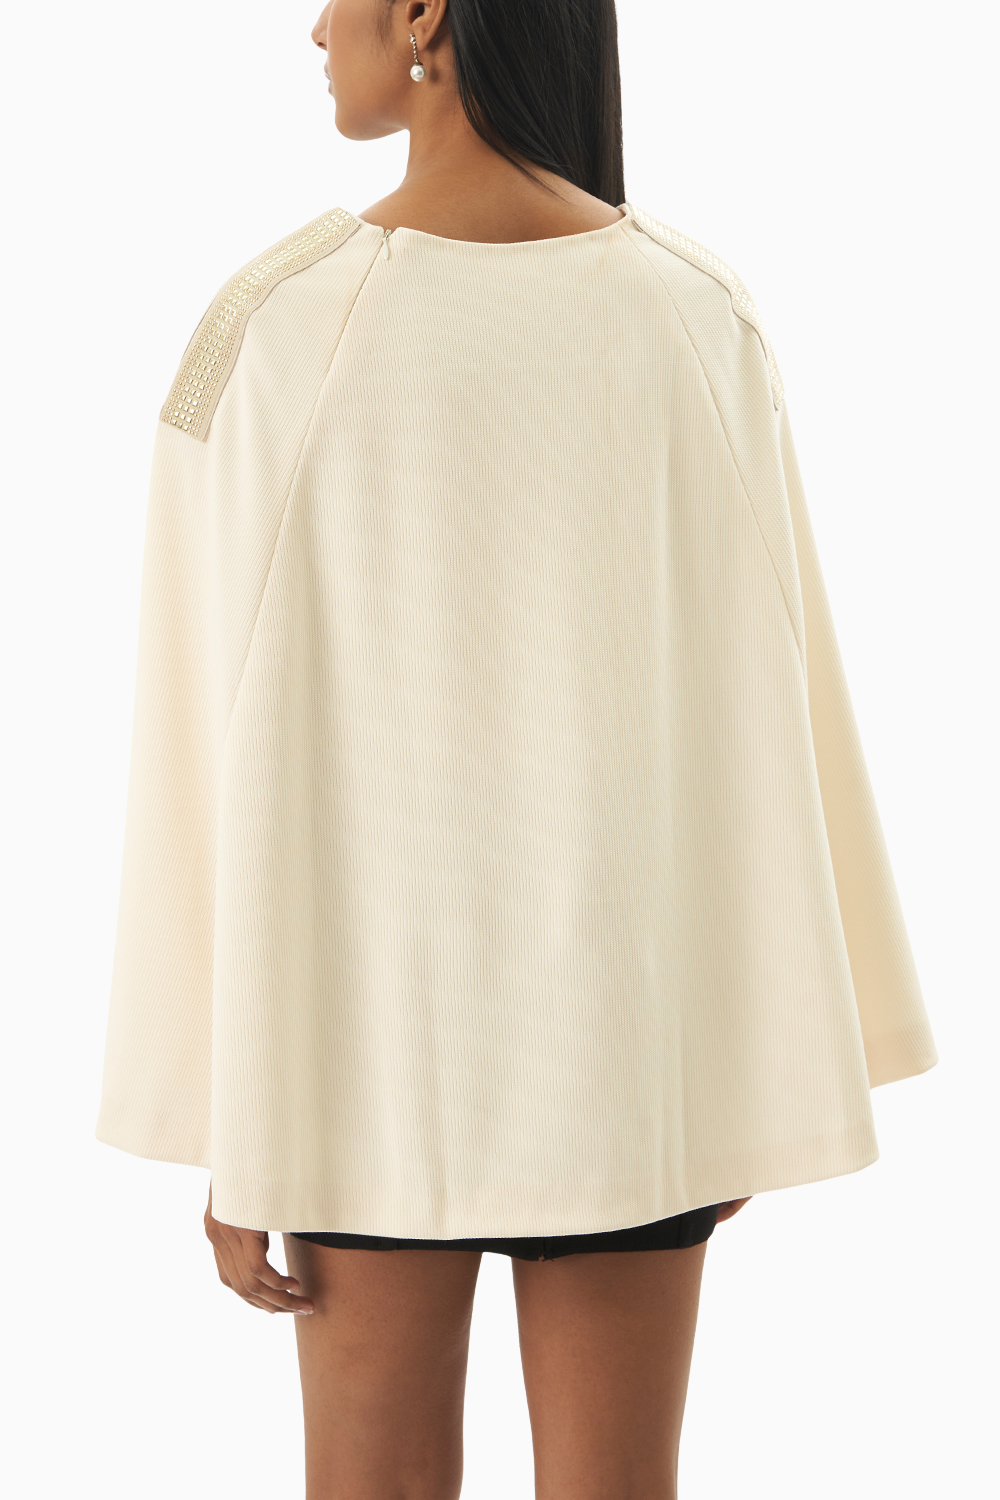 The White Rosewood Cape